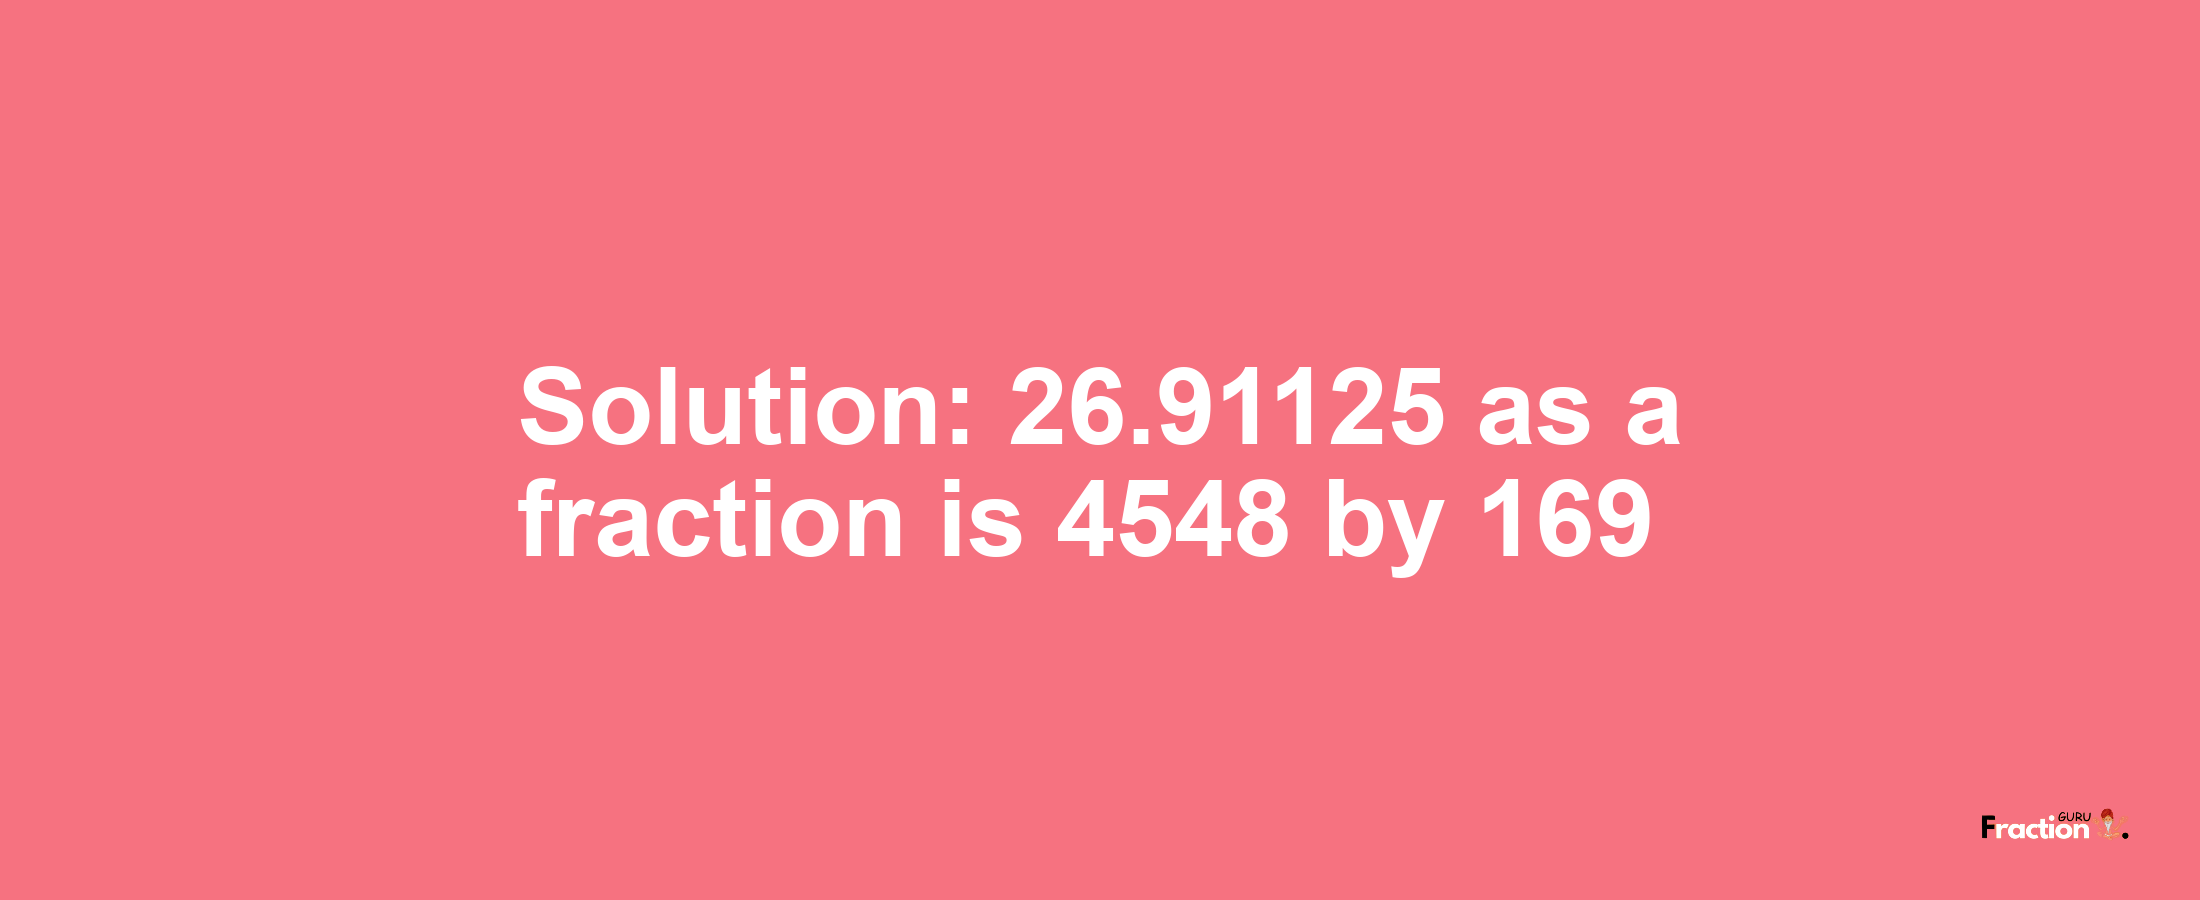 Solution:26.91125 as a fraction is 4548/169